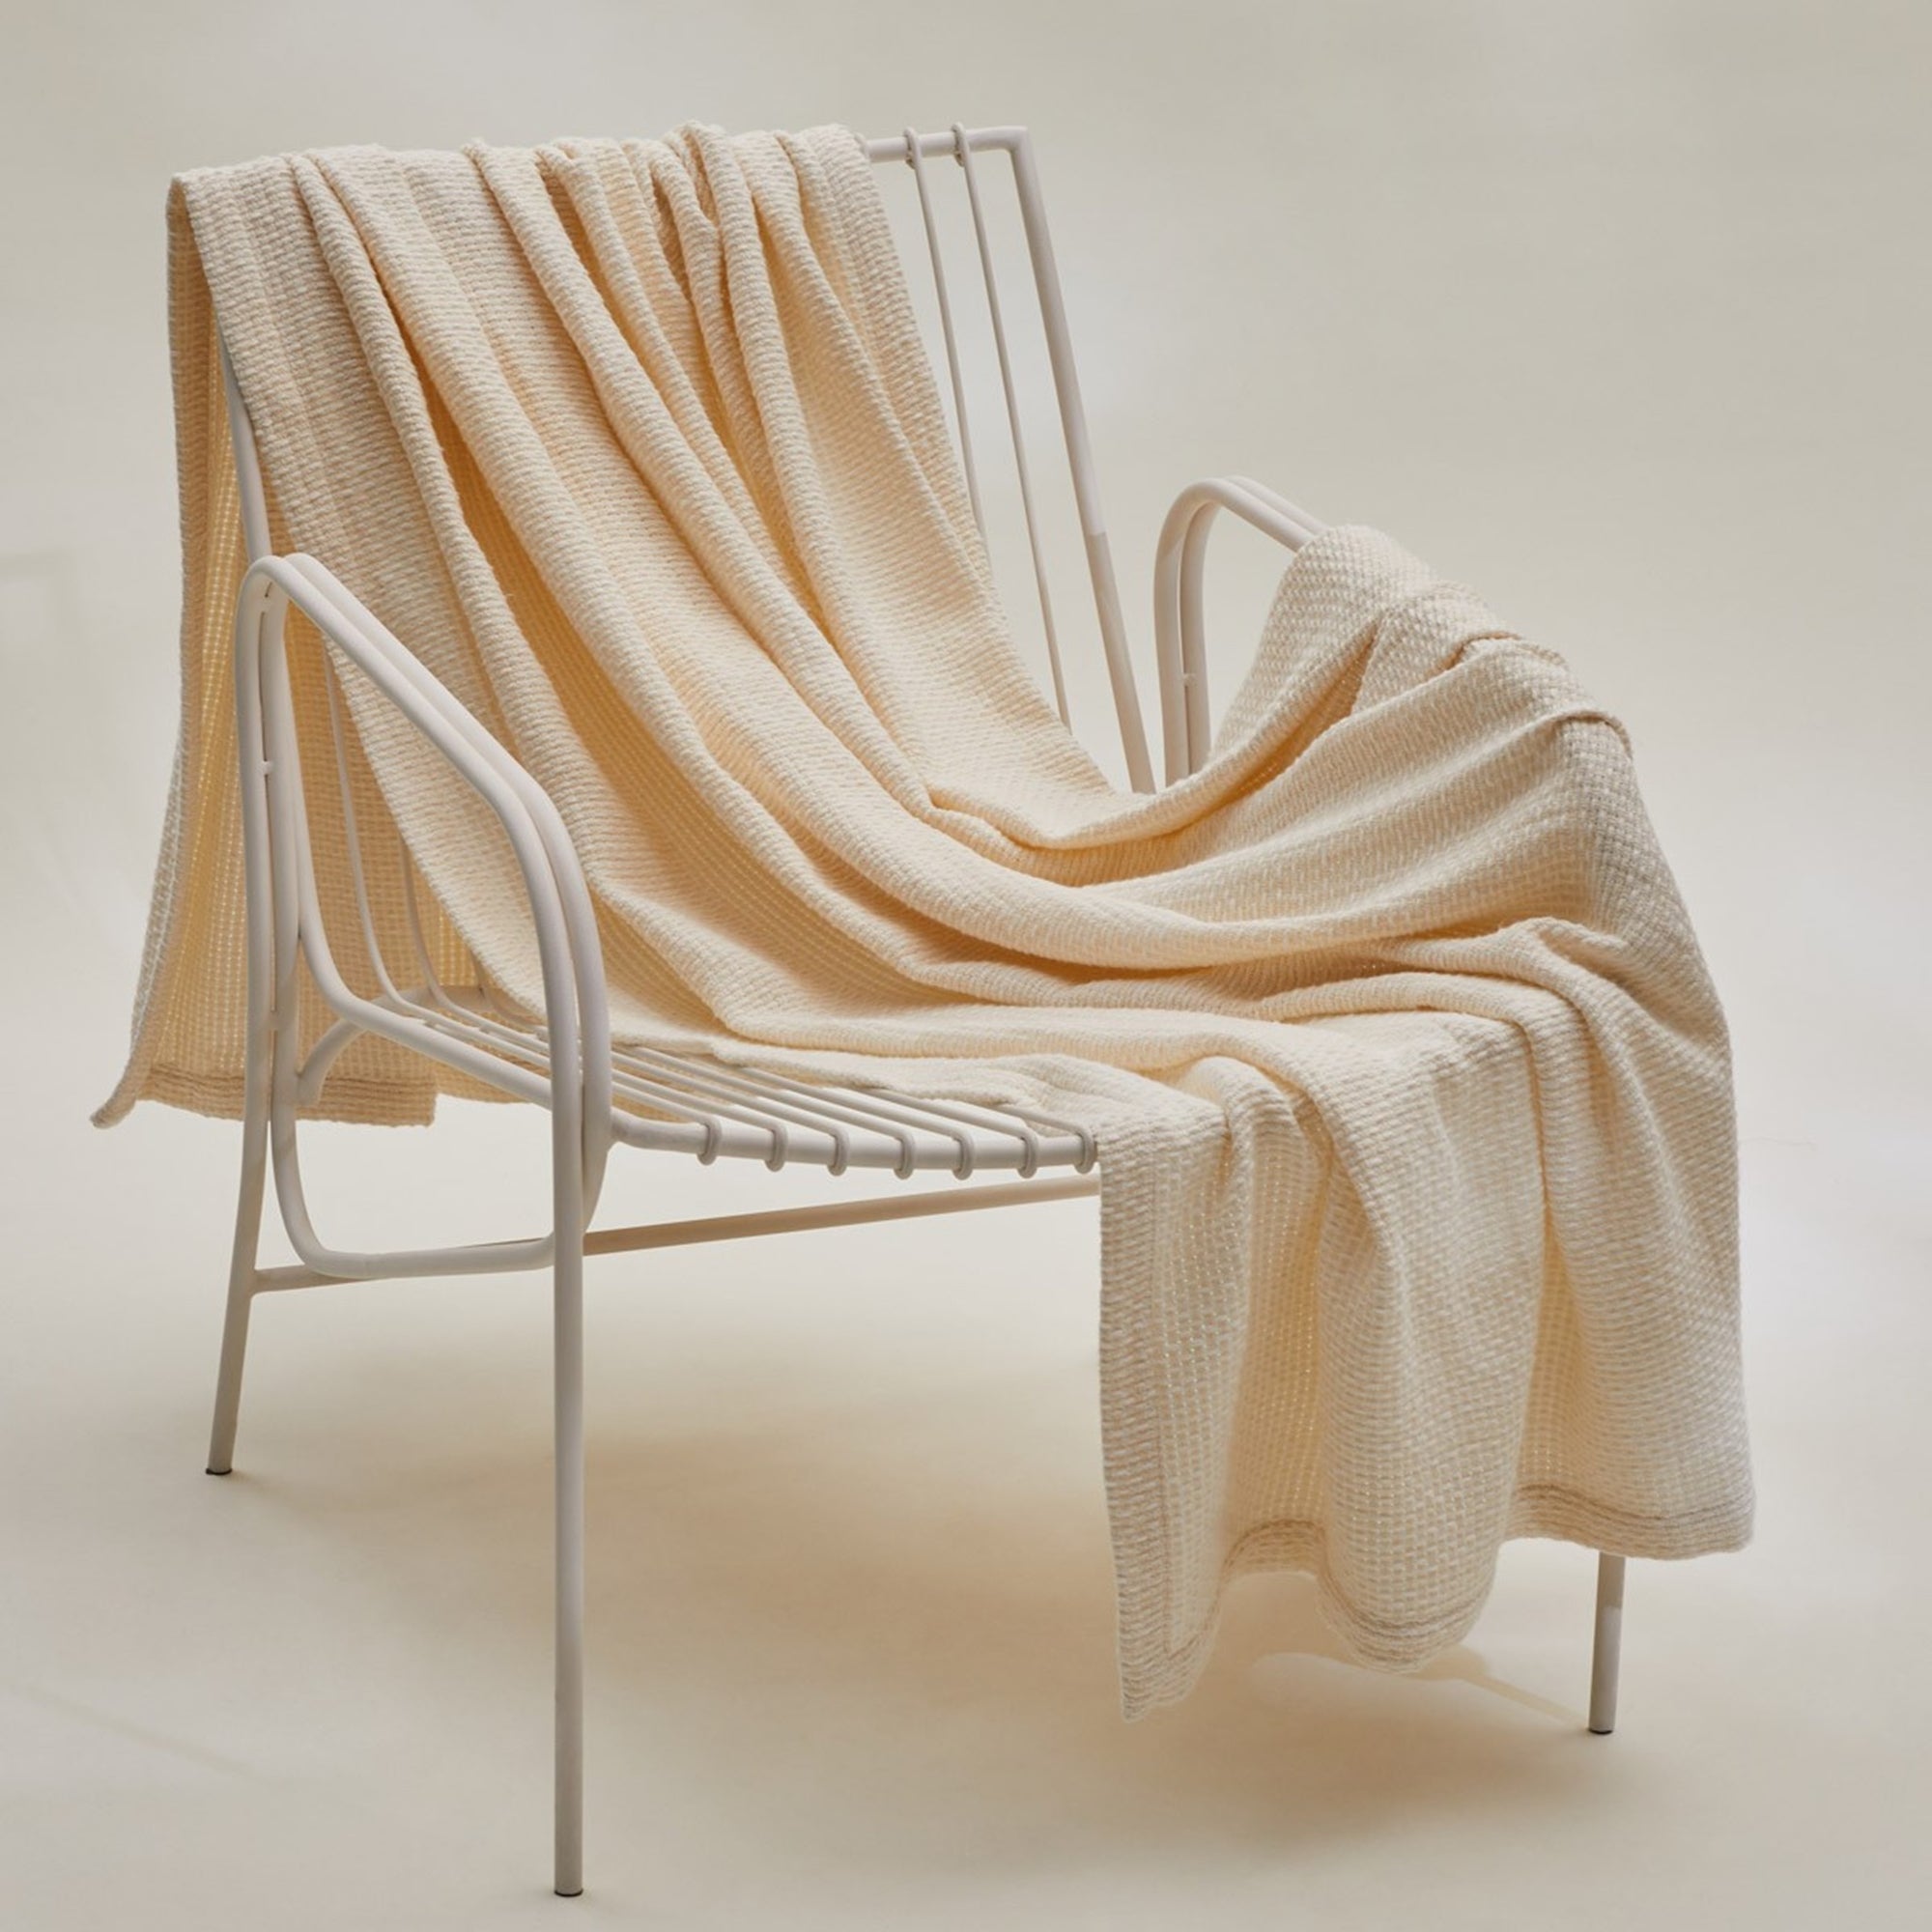 Lifestyle Image of Yves Delorme Transat Throw Hanging on a Chair in Celadon Color